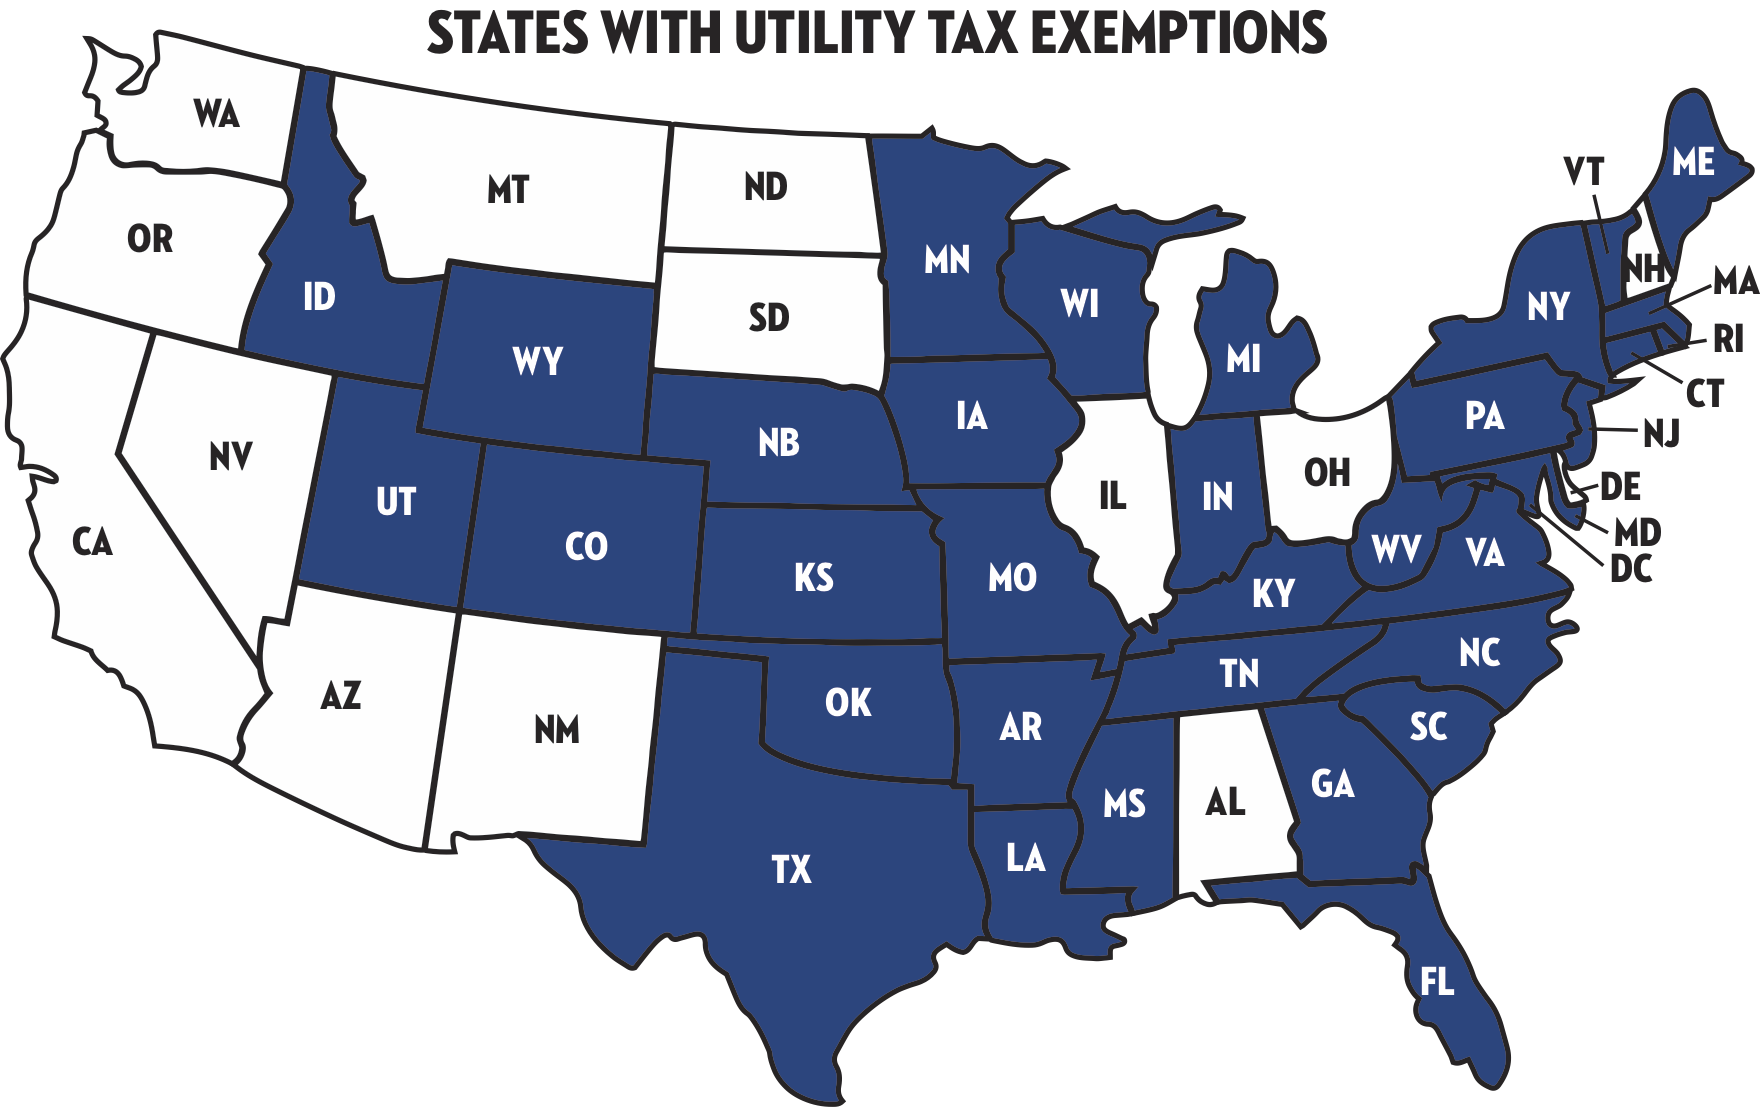 State Tax Exemption Map National Utility Solutions